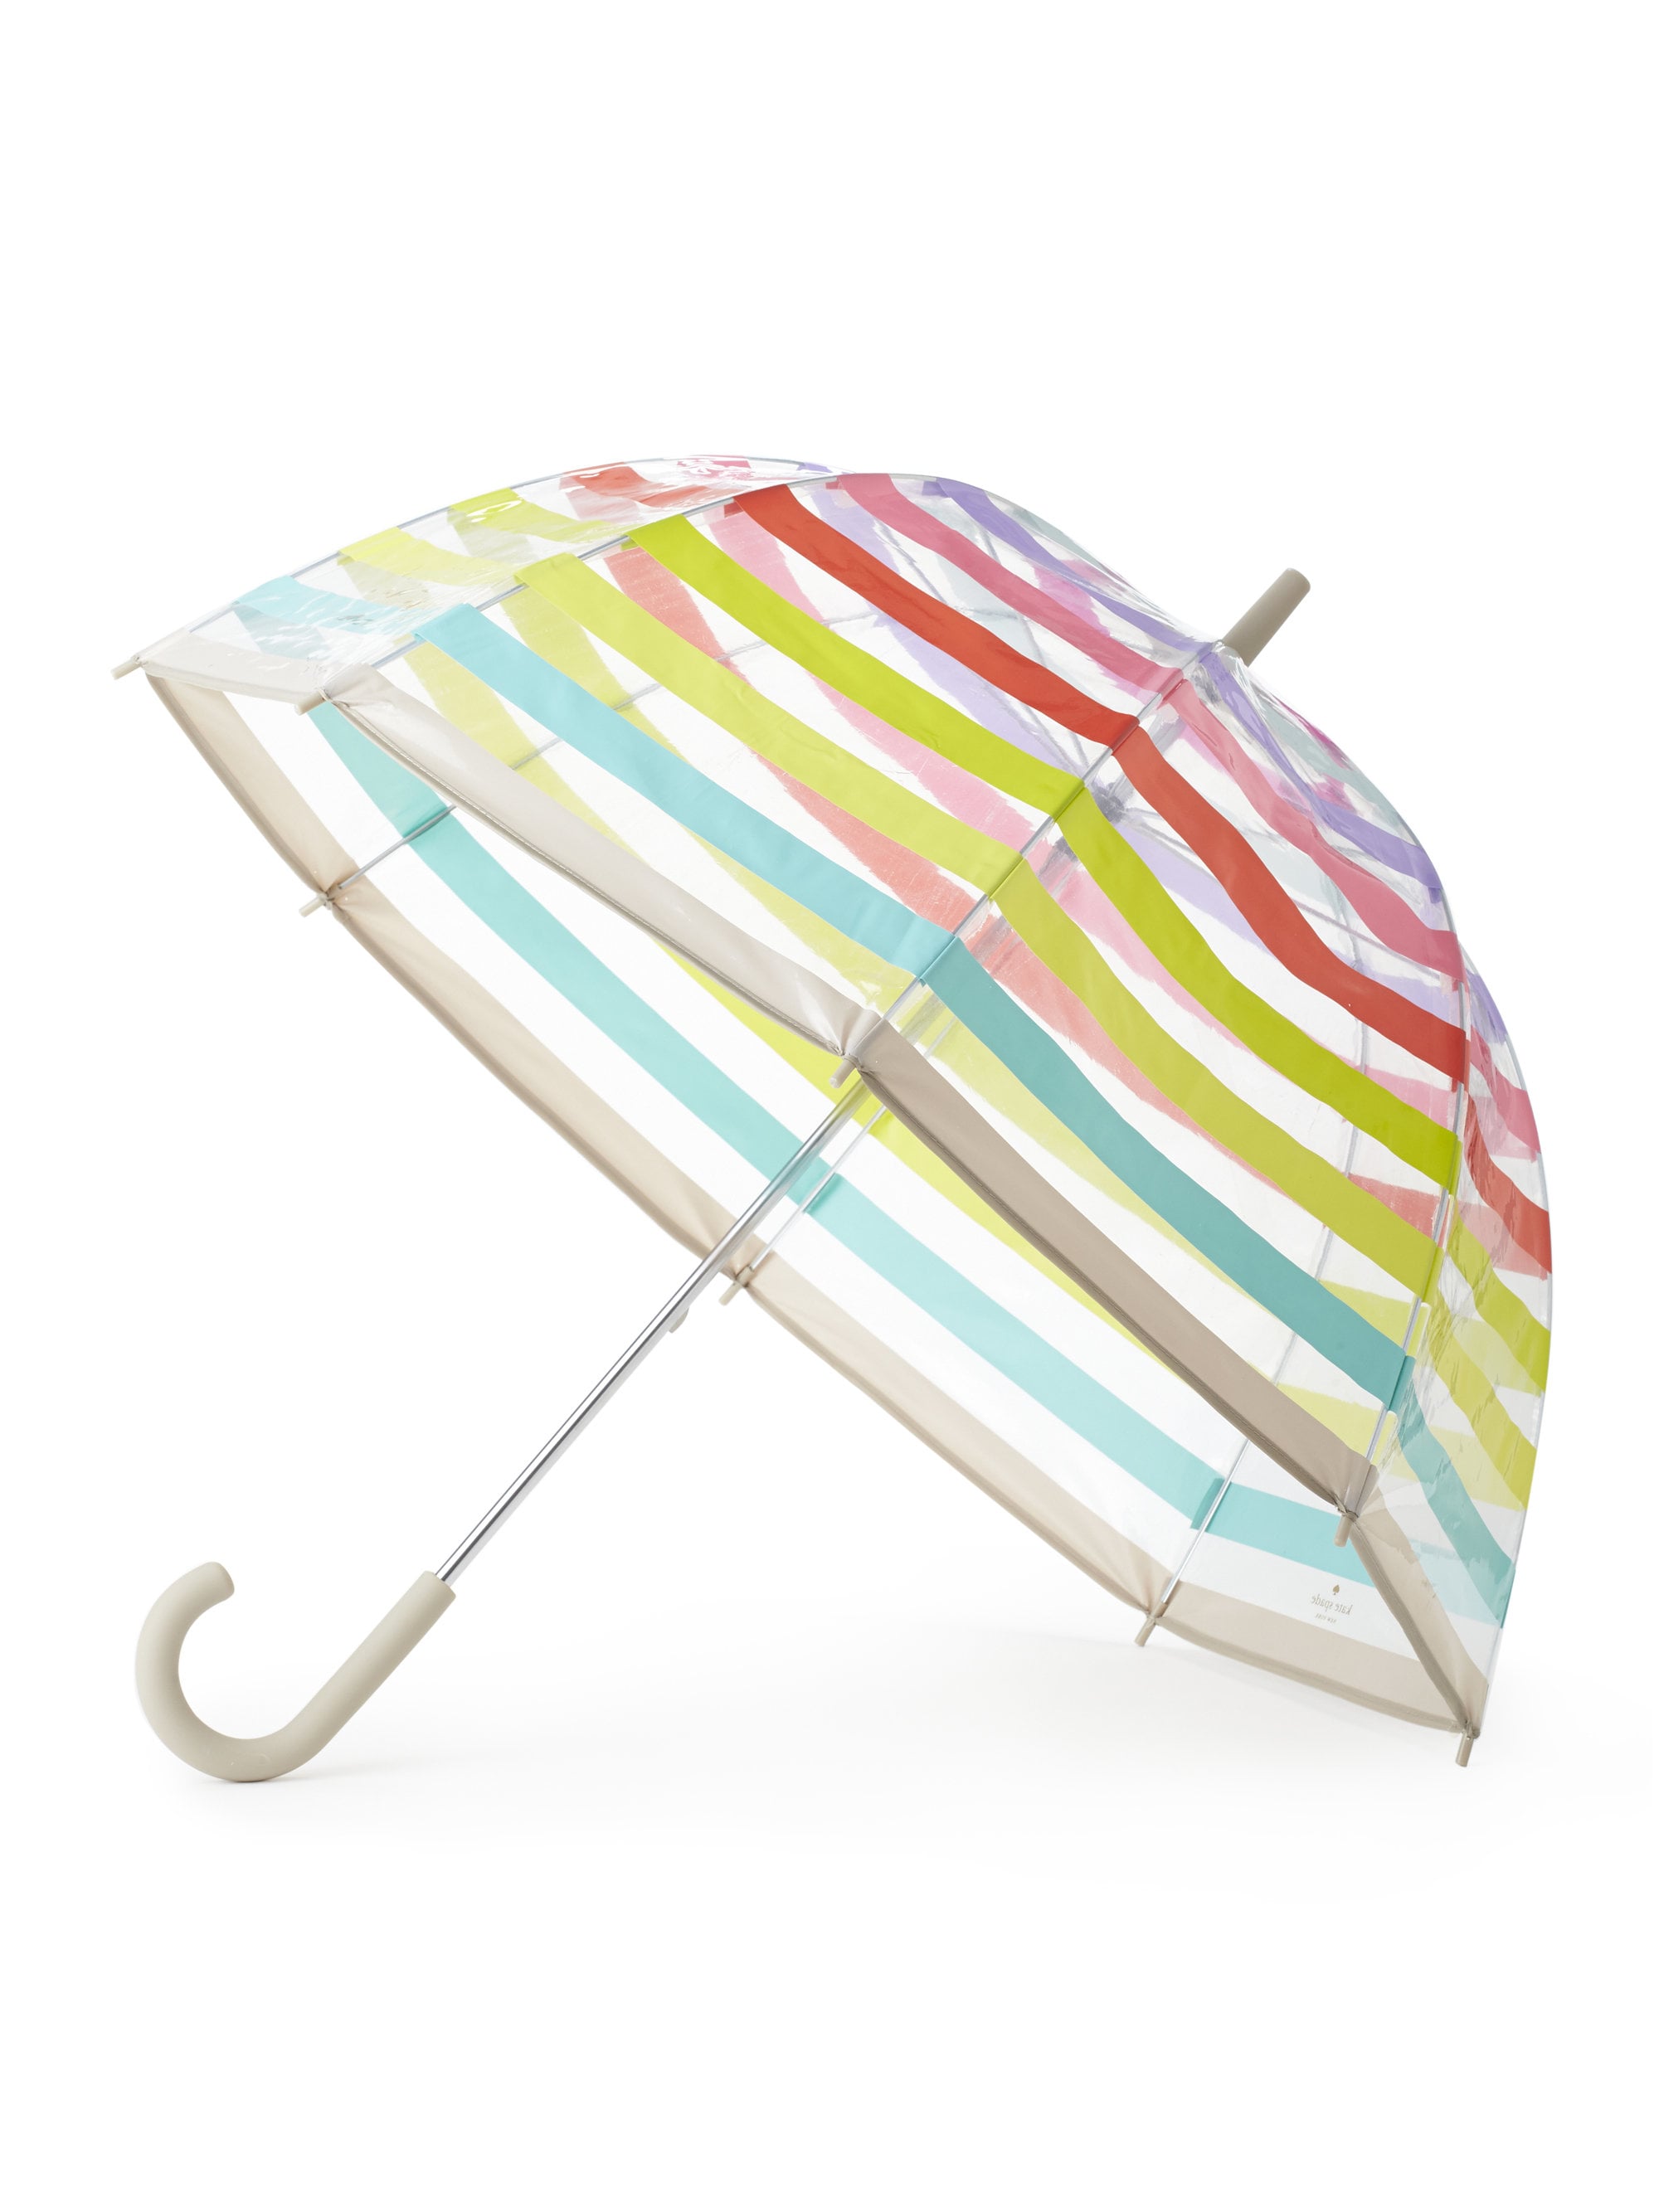 Candy Stripe Umbrella | 20 Must-Have Gifts From Kate Spade So Cute, You'll  Want to Keep Them For Yourself | POPSUGAR Smart Living Photo 12